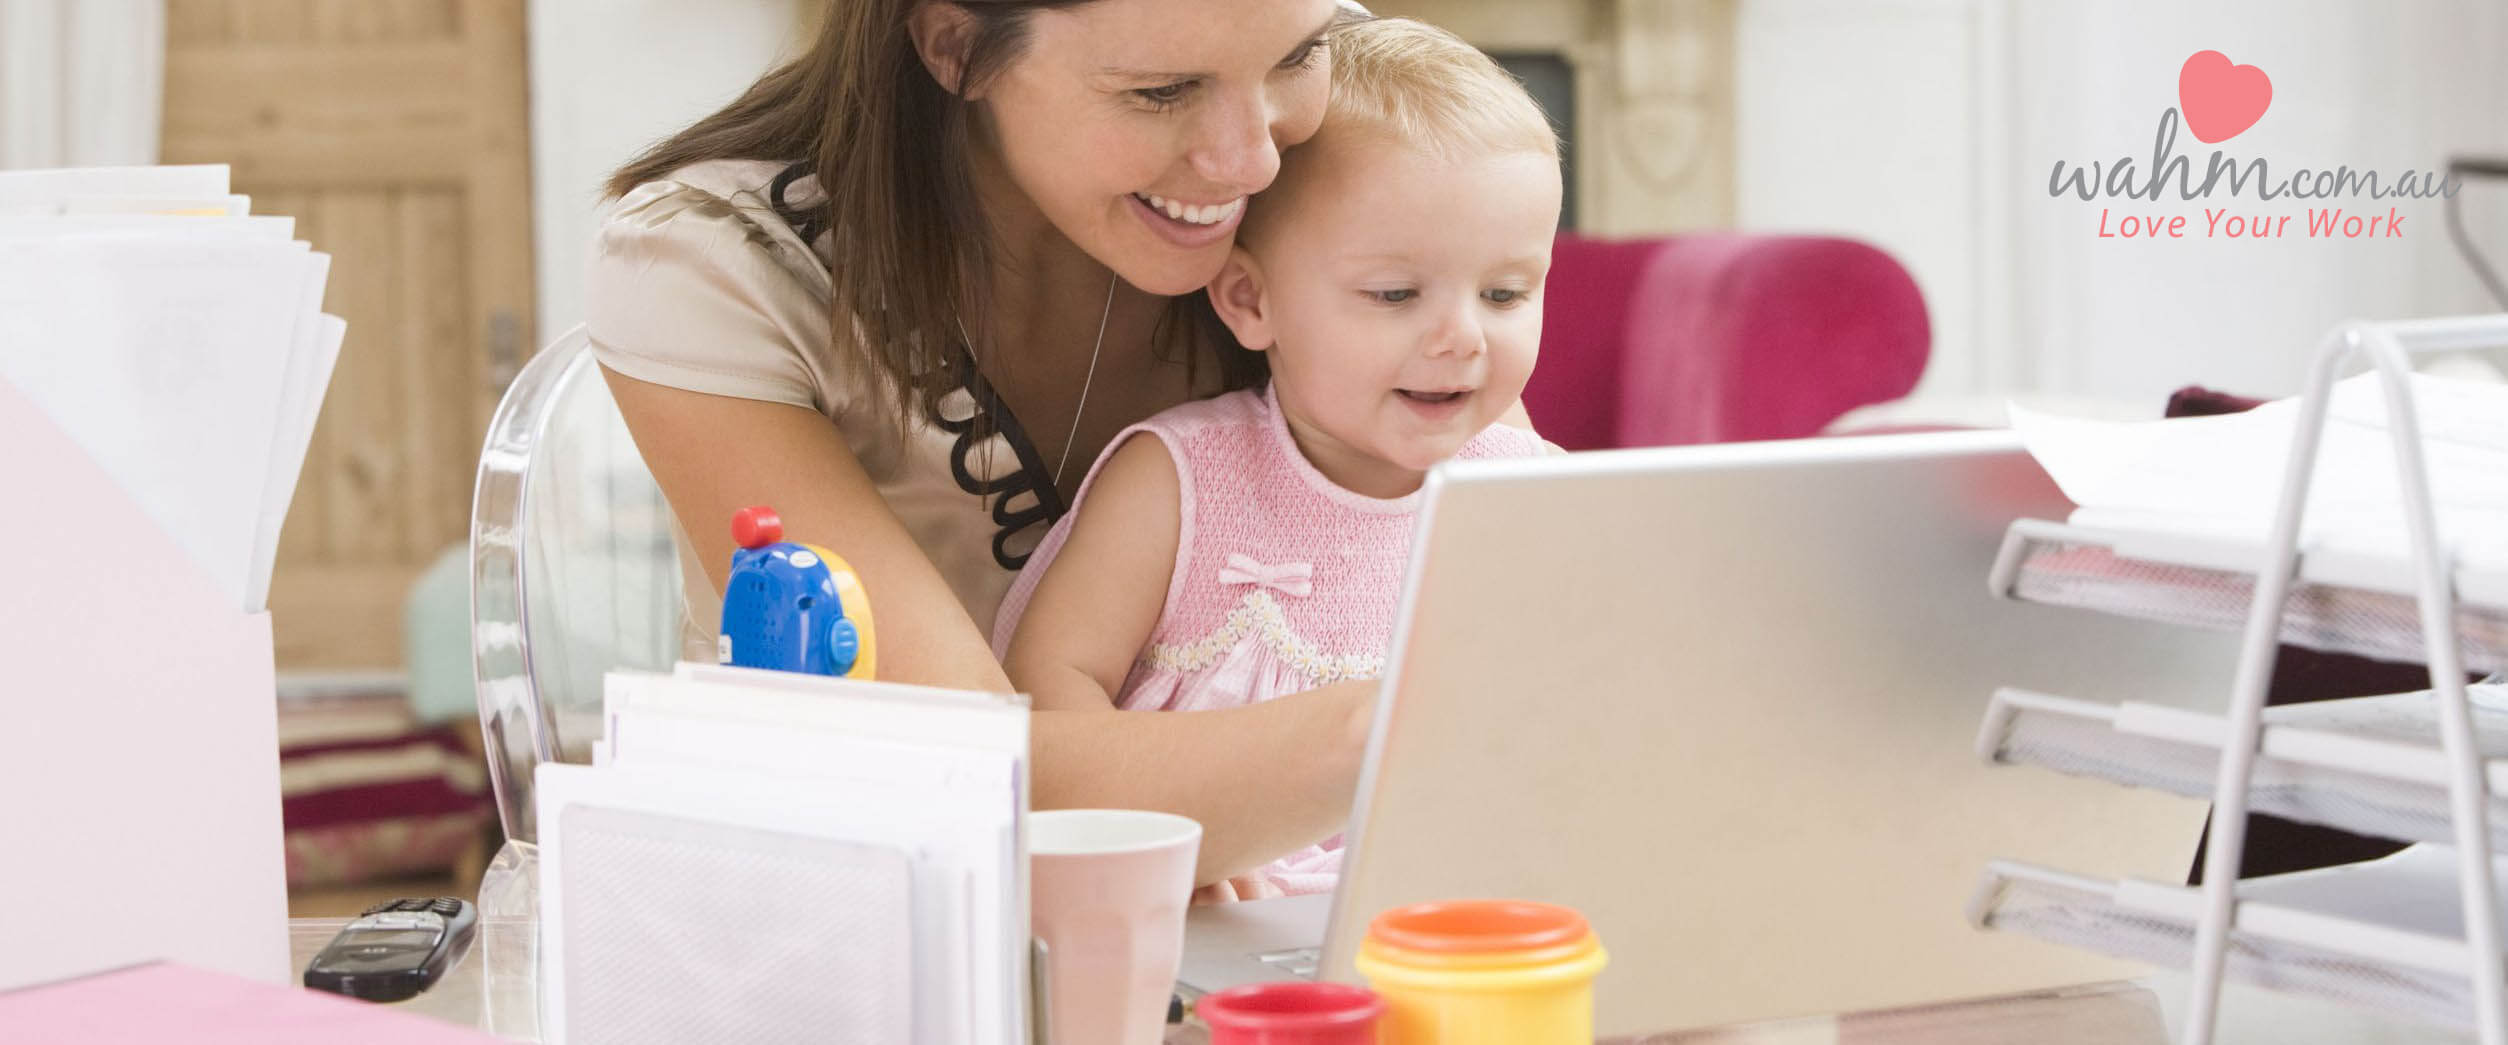 How to tell if you’re ready to become a Work At Home Mum #WAHM